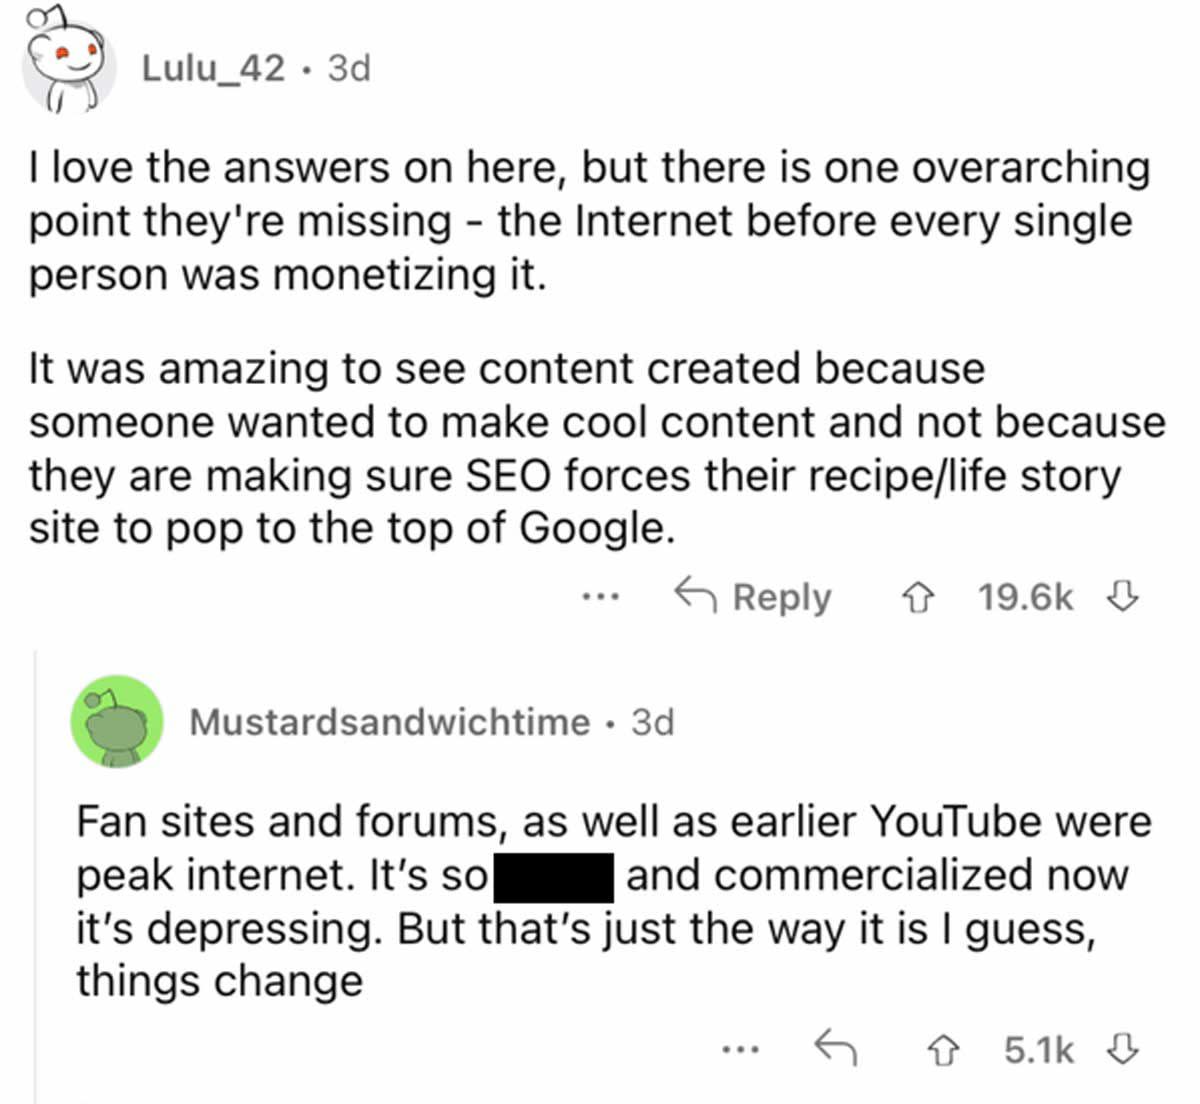 Reddit screenshot about how people used to make cool content just to make content.